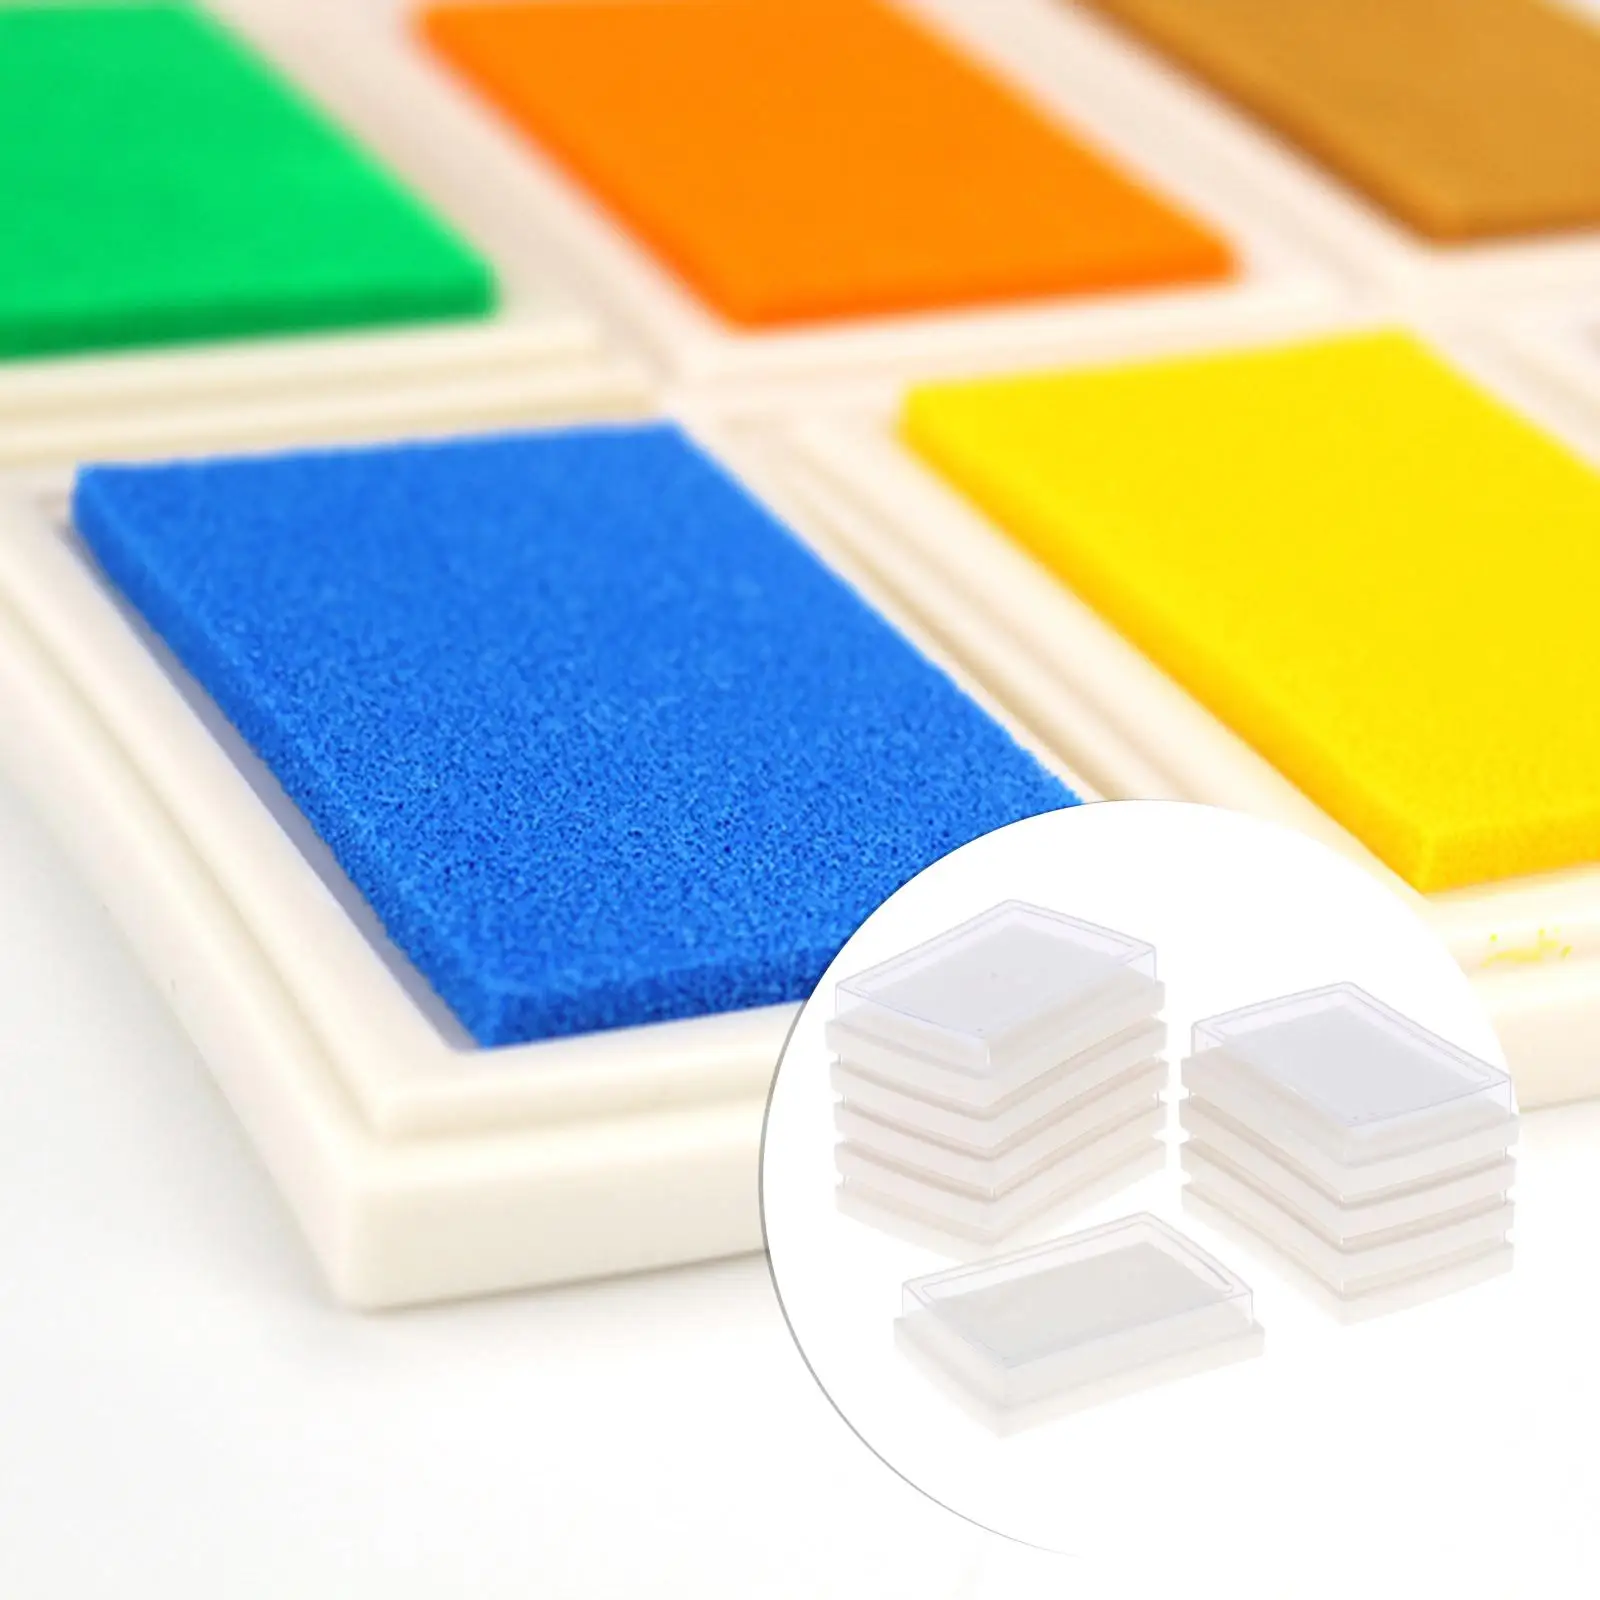 10 Pack Blank No Color Stamp Pad Craft Finger Ink Pad For Ink Refill Pigment Pad Kids Scrapbook Painting Card Making